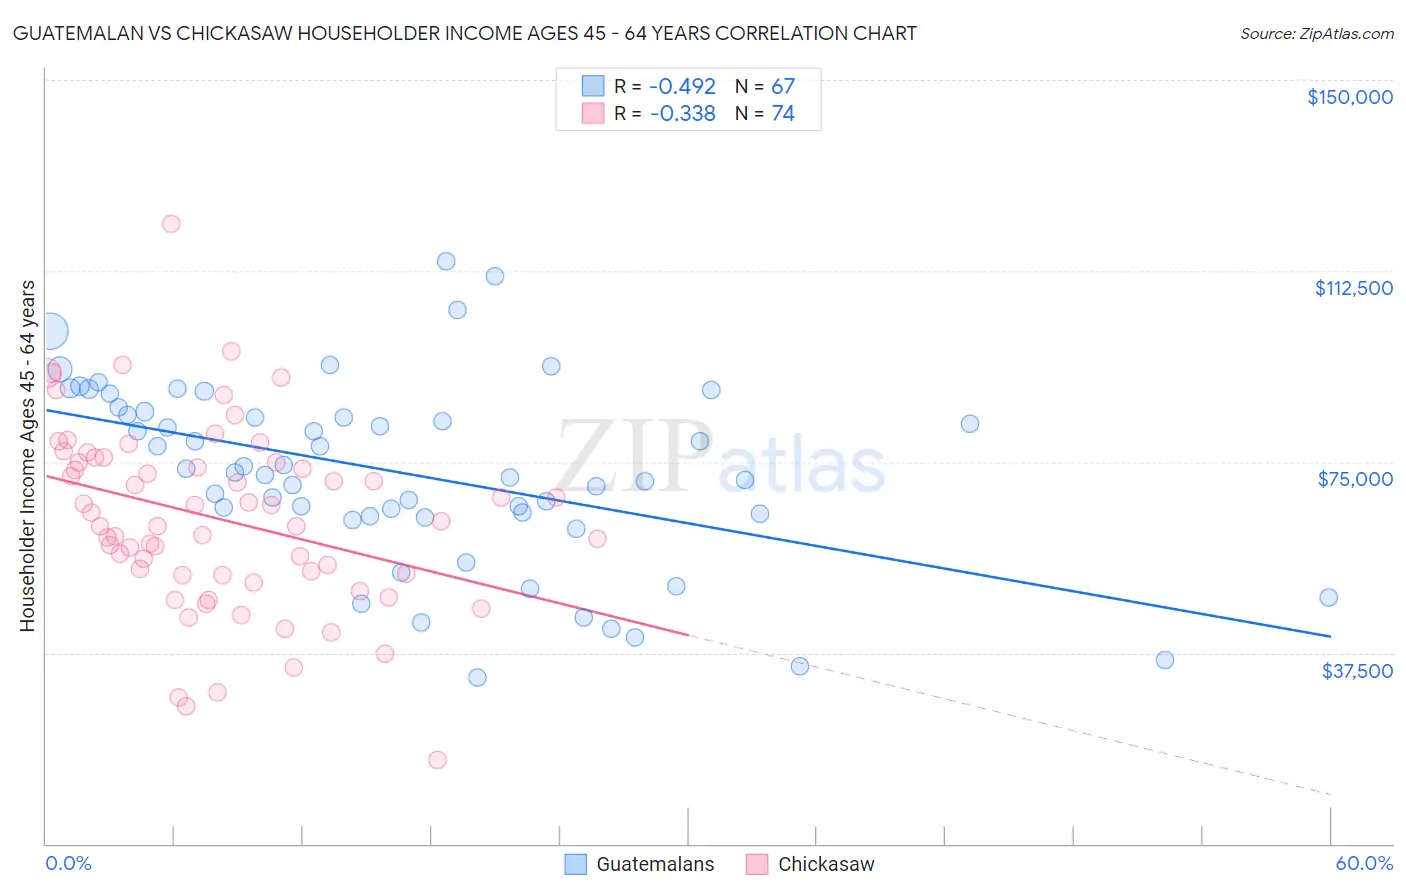 Guatemalan vs Chickasaw Householder Income Ages 45 - 64 years